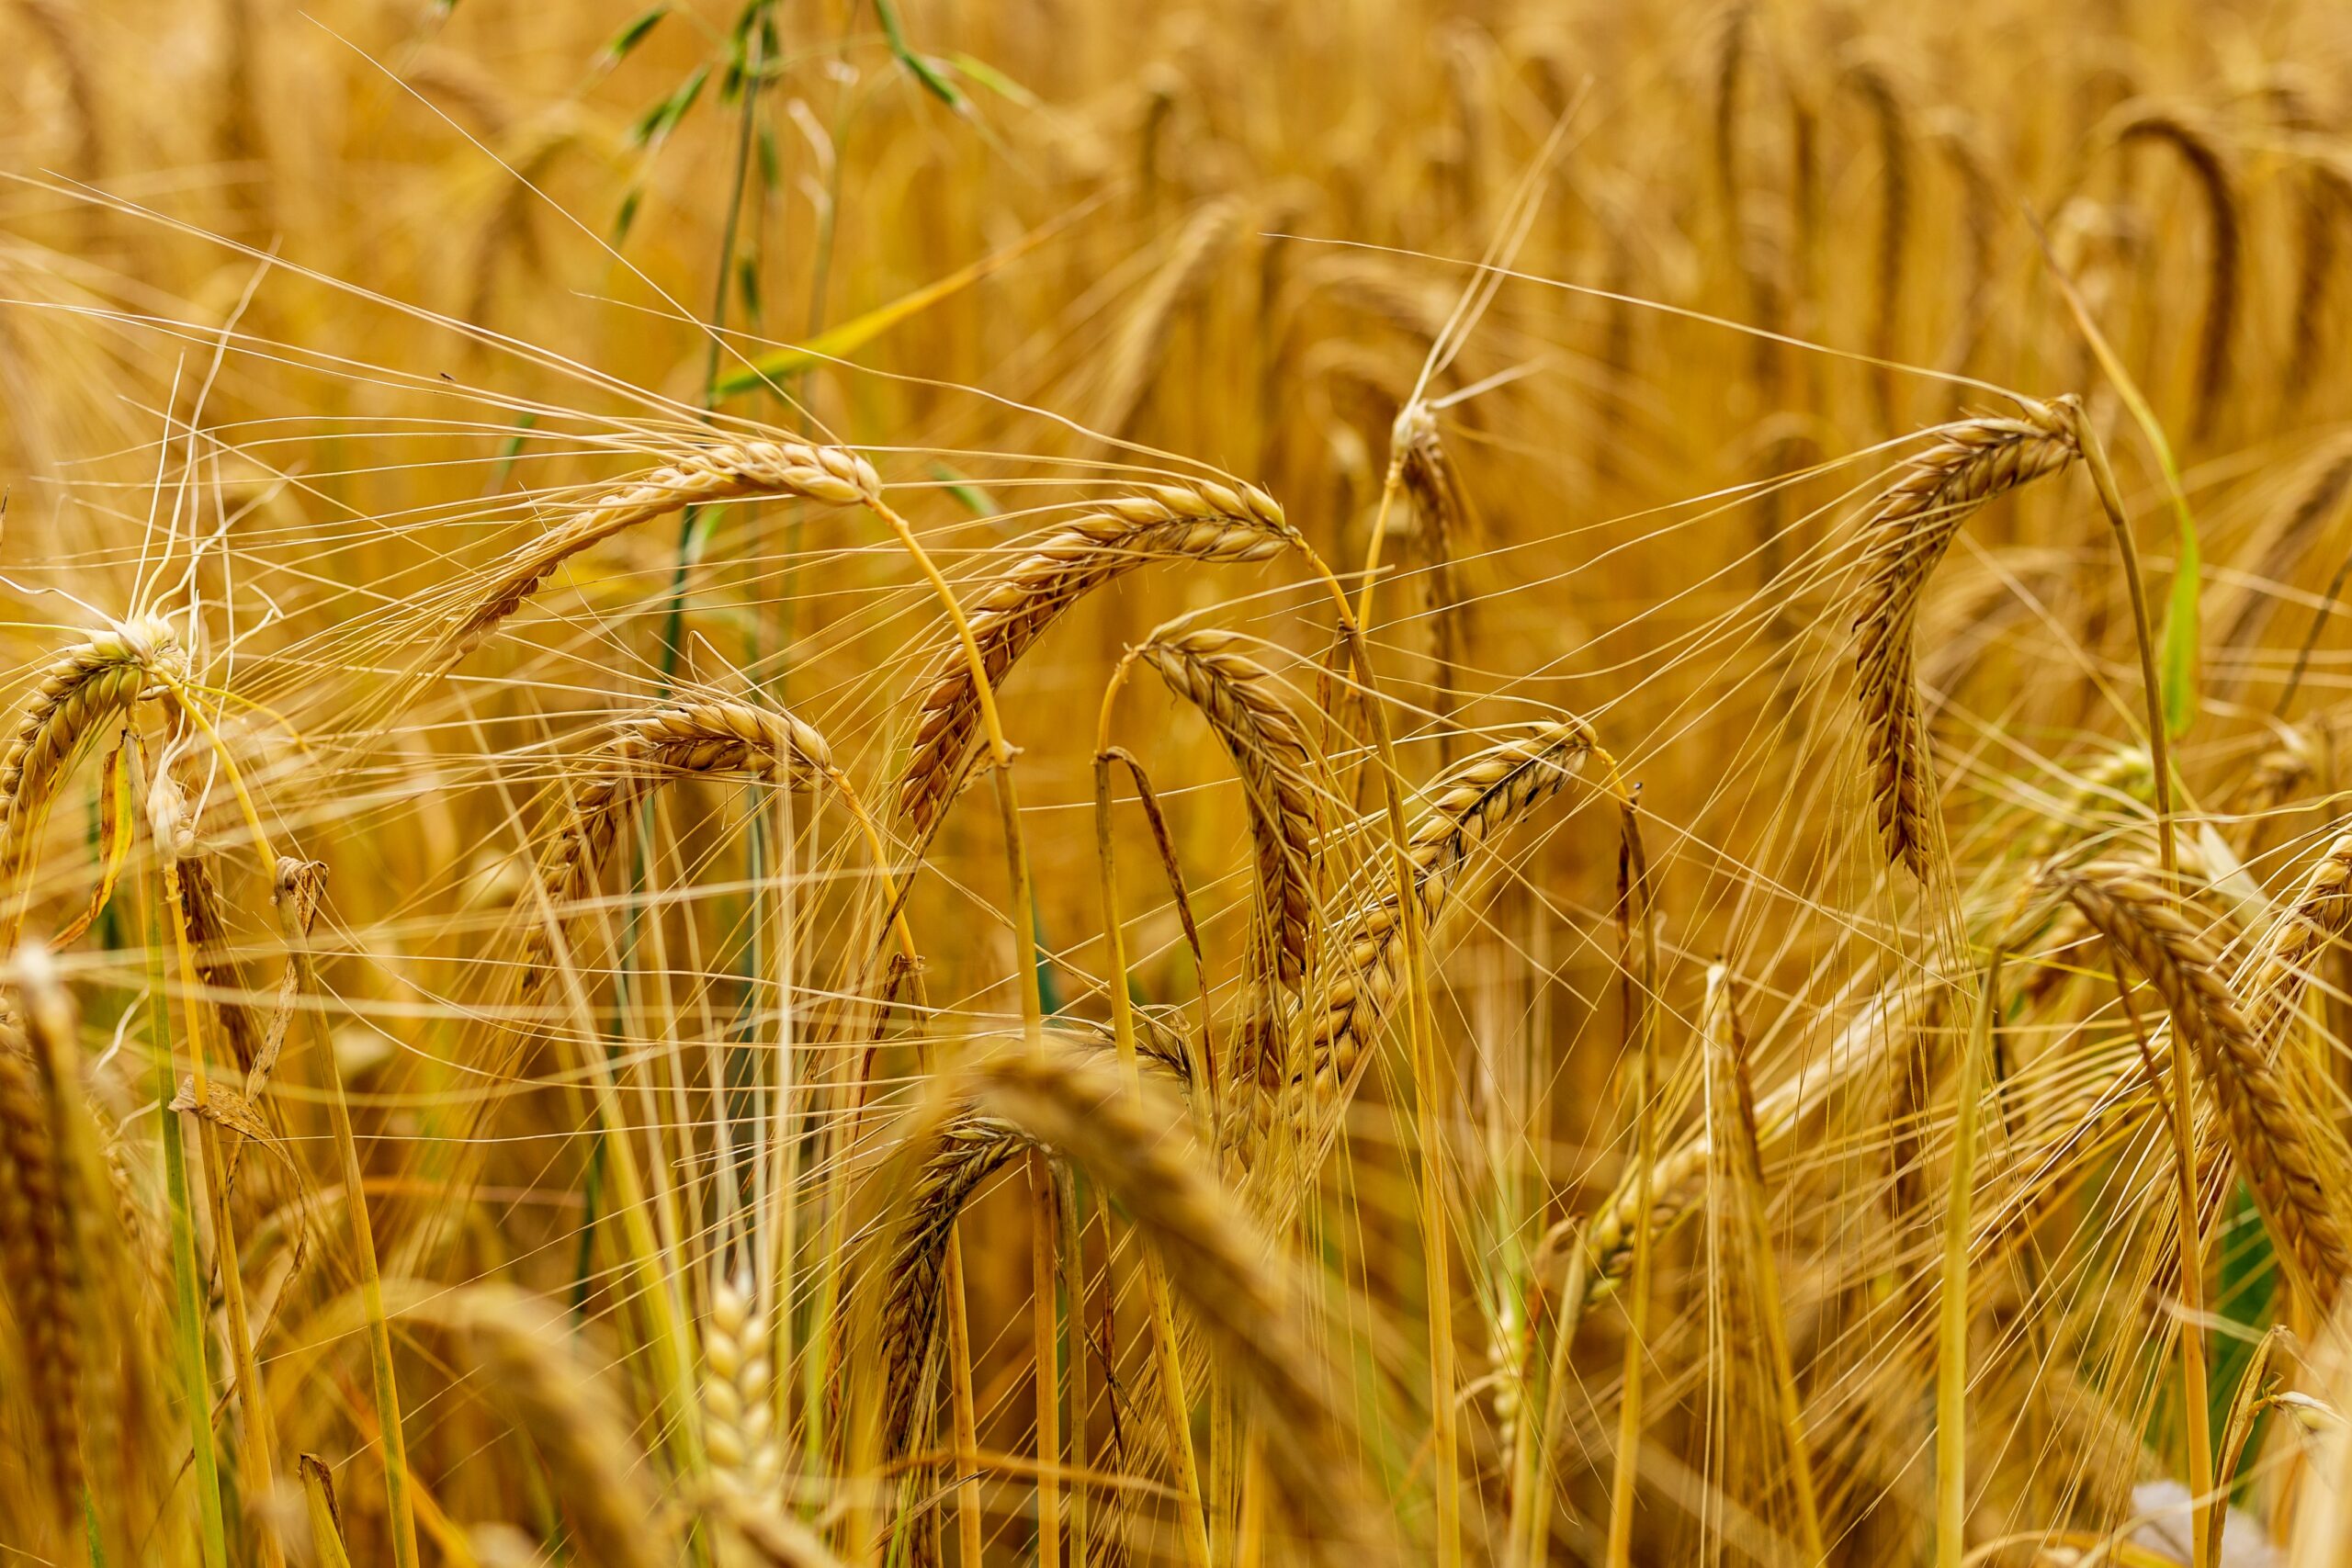 Global wheat price falls for fifth consecutive week